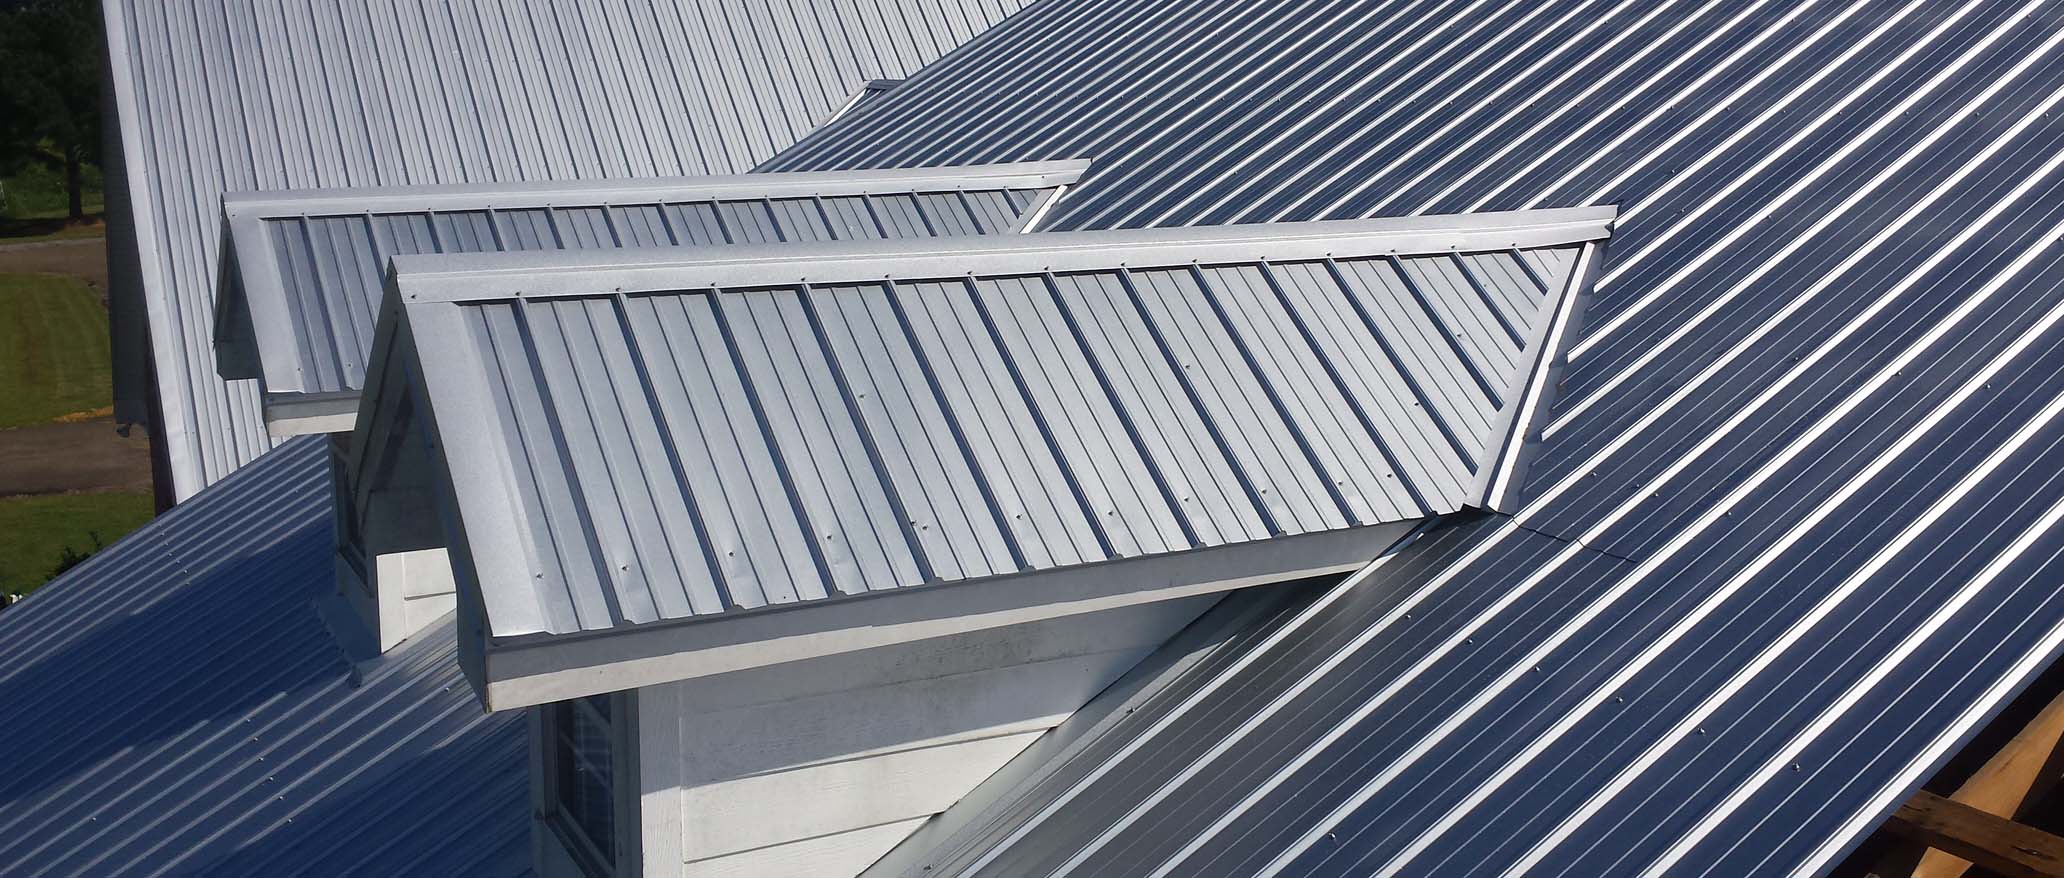 A light grey, ribbed metal roof with two dormers on a sunny day.